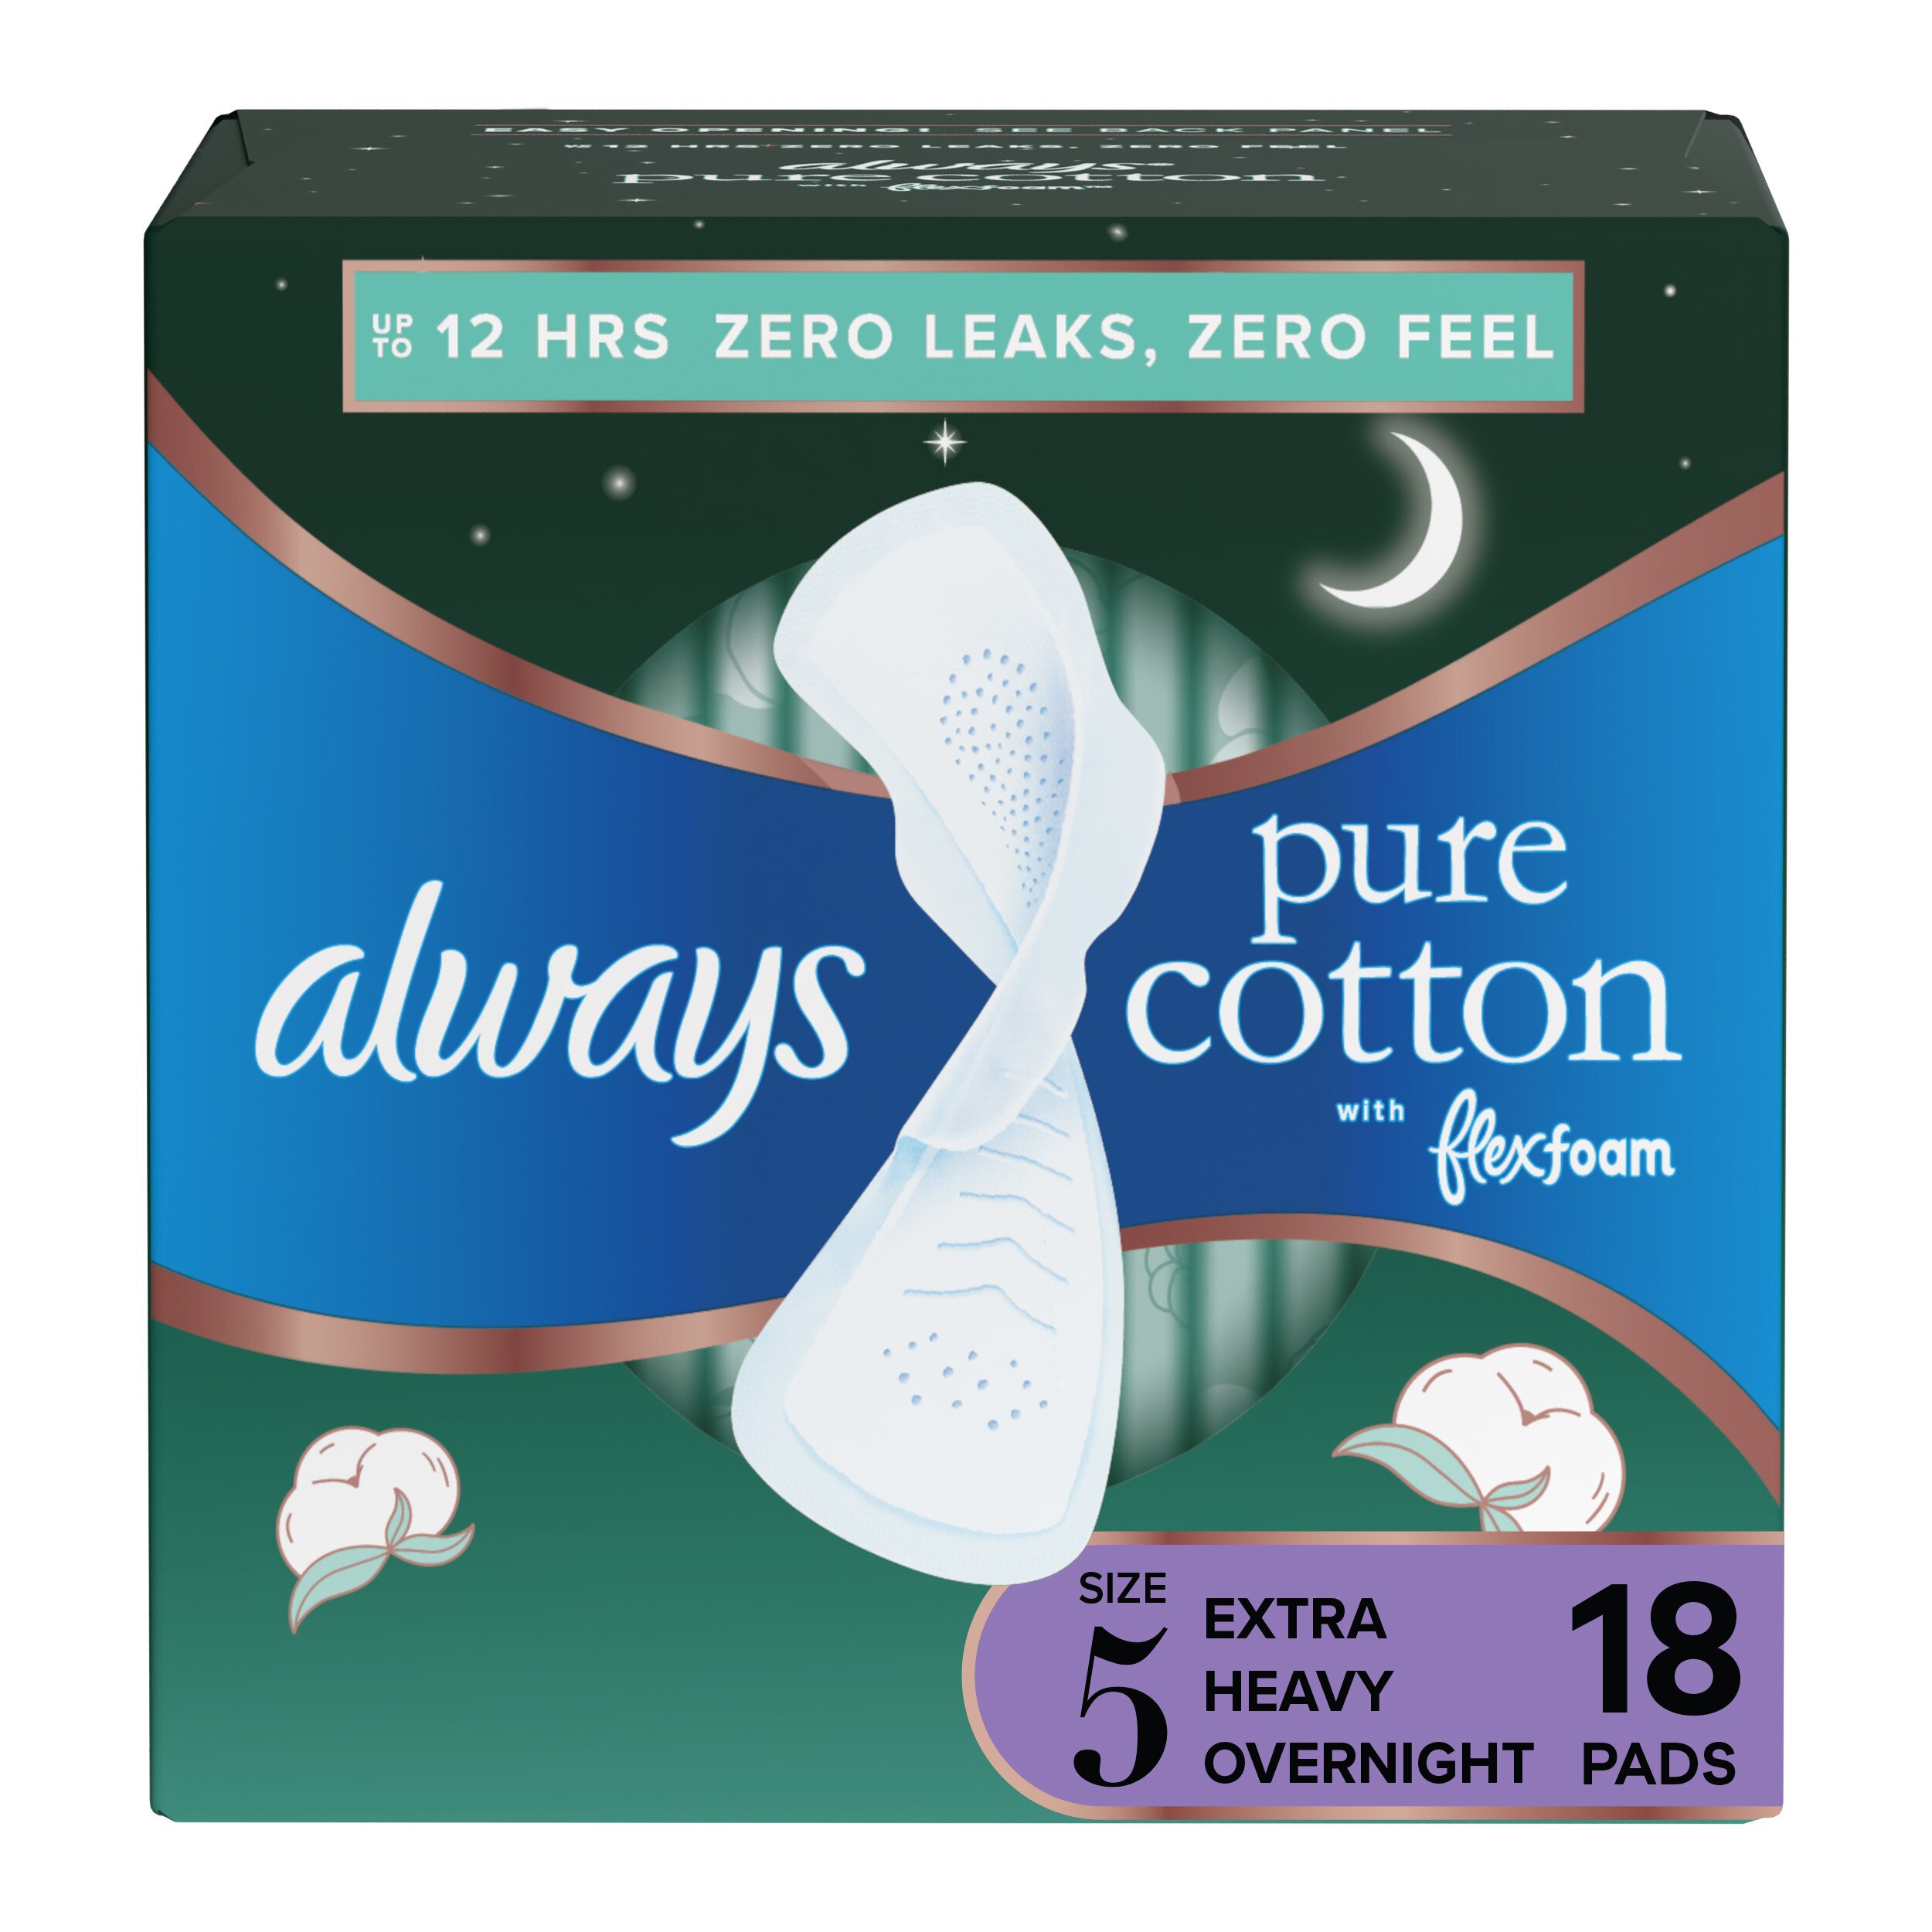 Always Pure Cotton with FlexFoam Pads for Women Size 5 Extra Heavy Overnight Absorbency, with Wings, 18 CT